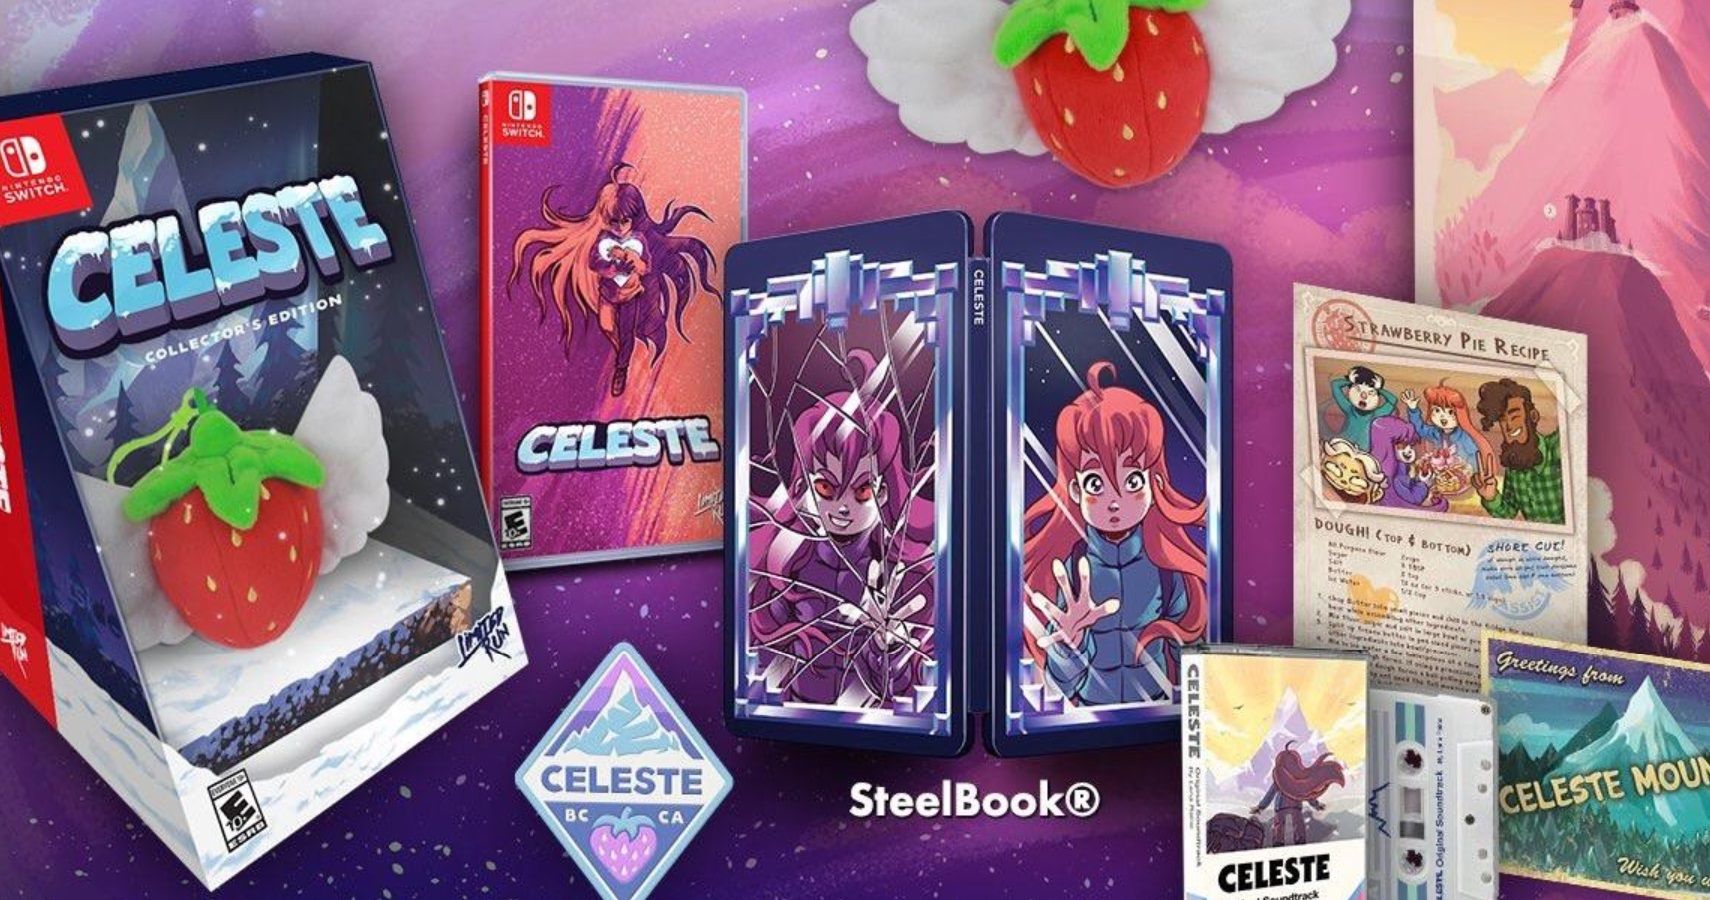 Indie game 'Celeste' is getting a limited physical release